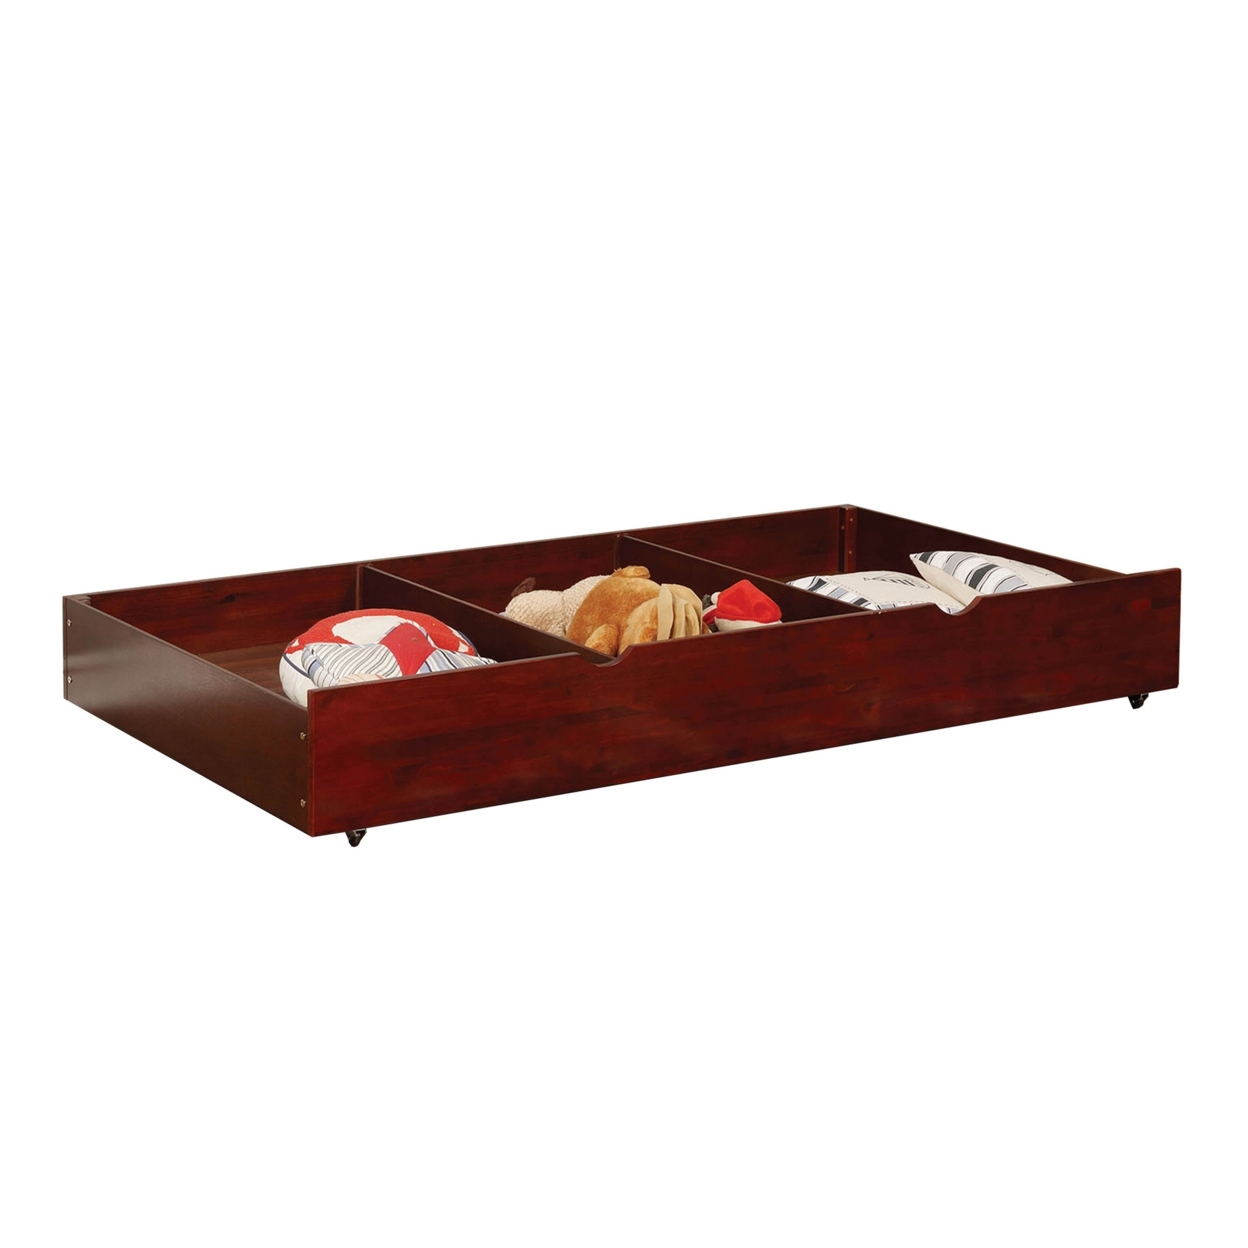 Transitional Style Wooden Trundle With Large Storage Drawer, Warm Cherry Brown- Saltoro Sherpi